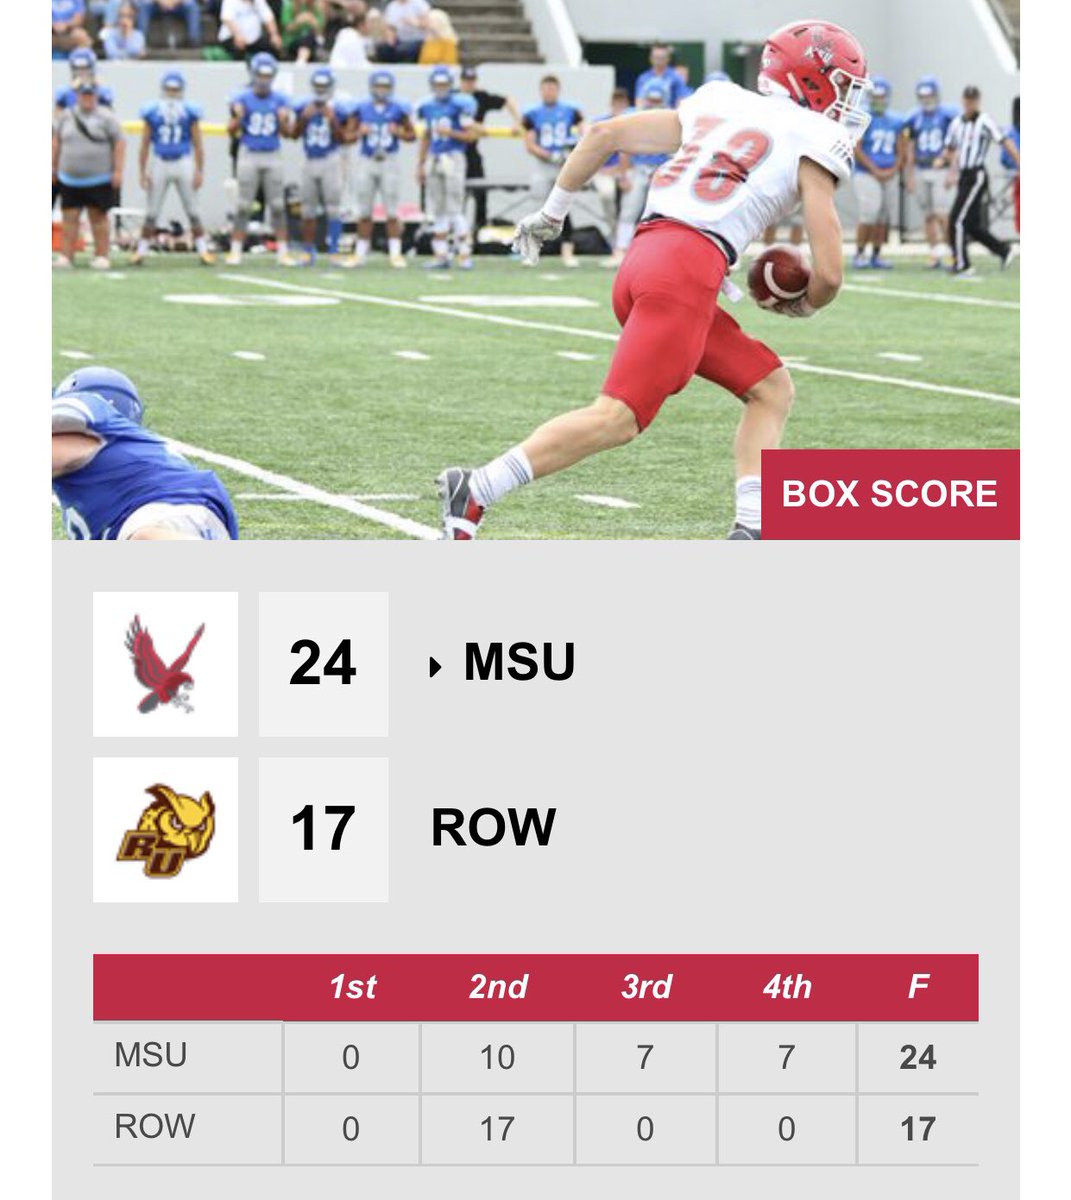 #MontclairState takes down #Rowan

#Division3  Football is exciting If you live in the state of #NewJersey 

Theres only one team that ever won a #Championship #KnuteRockneBowl 

1970 #Montclair 7-6 Over #HamptonSydney
#redhawk4life @msuredhawks

        JERSEYKIDPICKS.COM